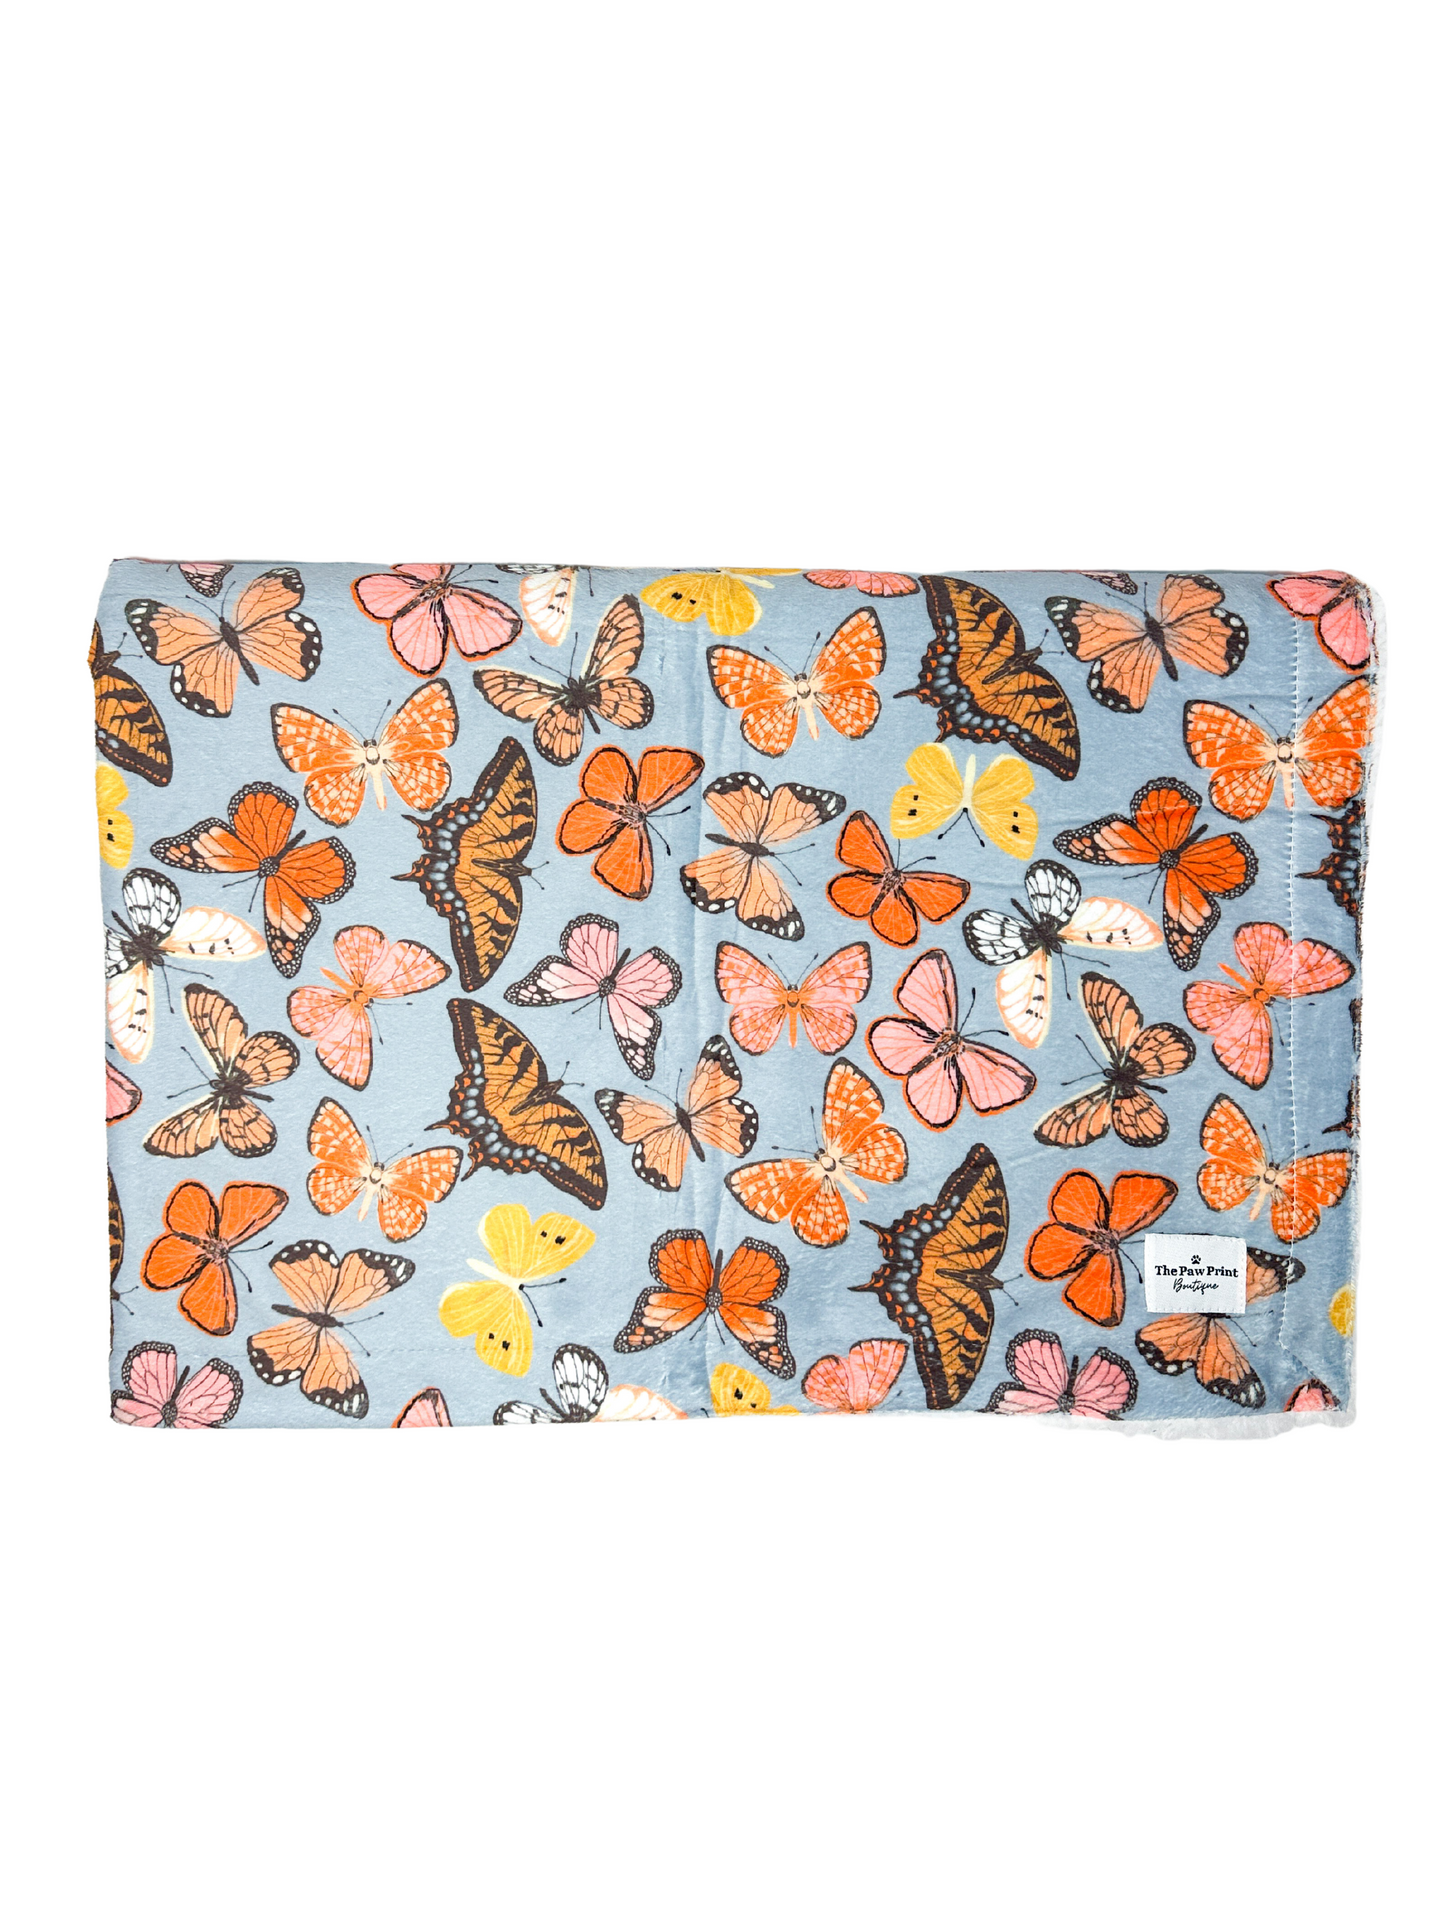 The Beautiful Butterfly Dog Blanket